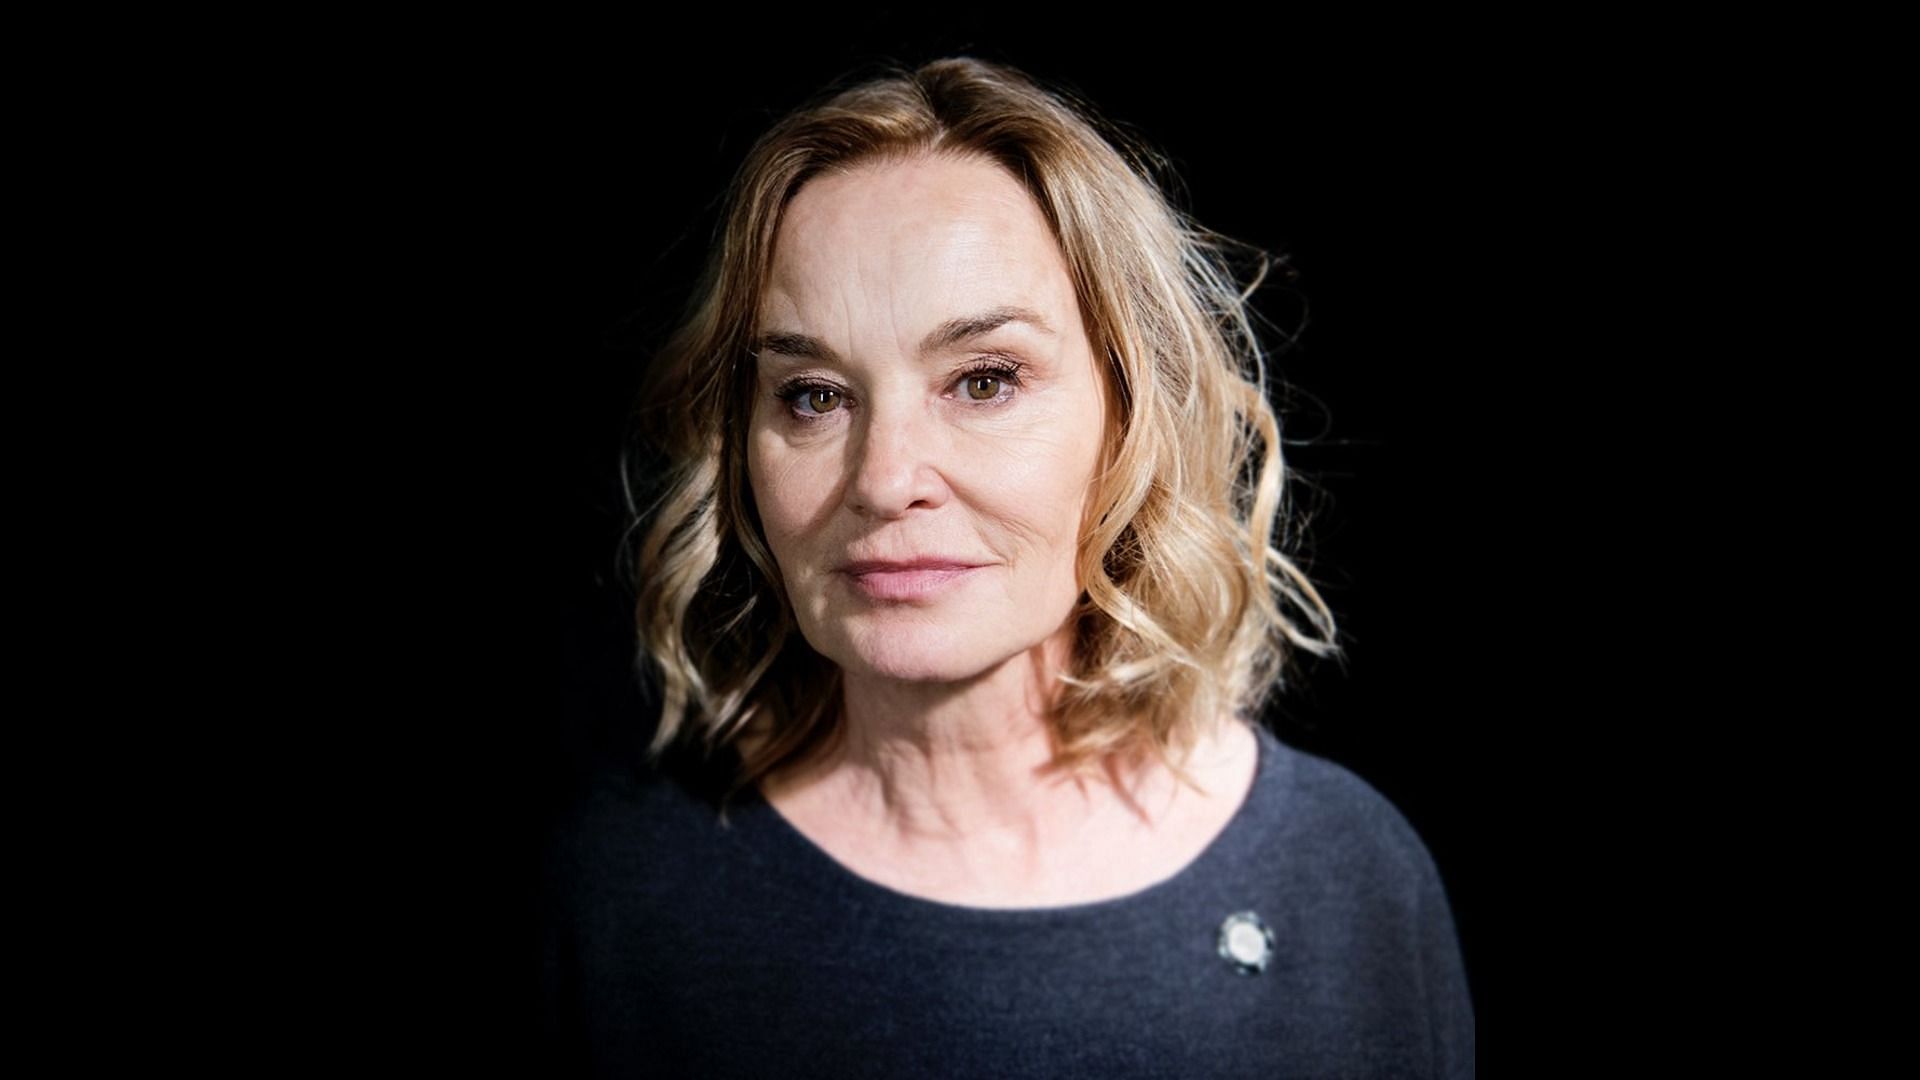 Jessica Lange has hinted towards her retirement in an interview (Image via ahszone/X)